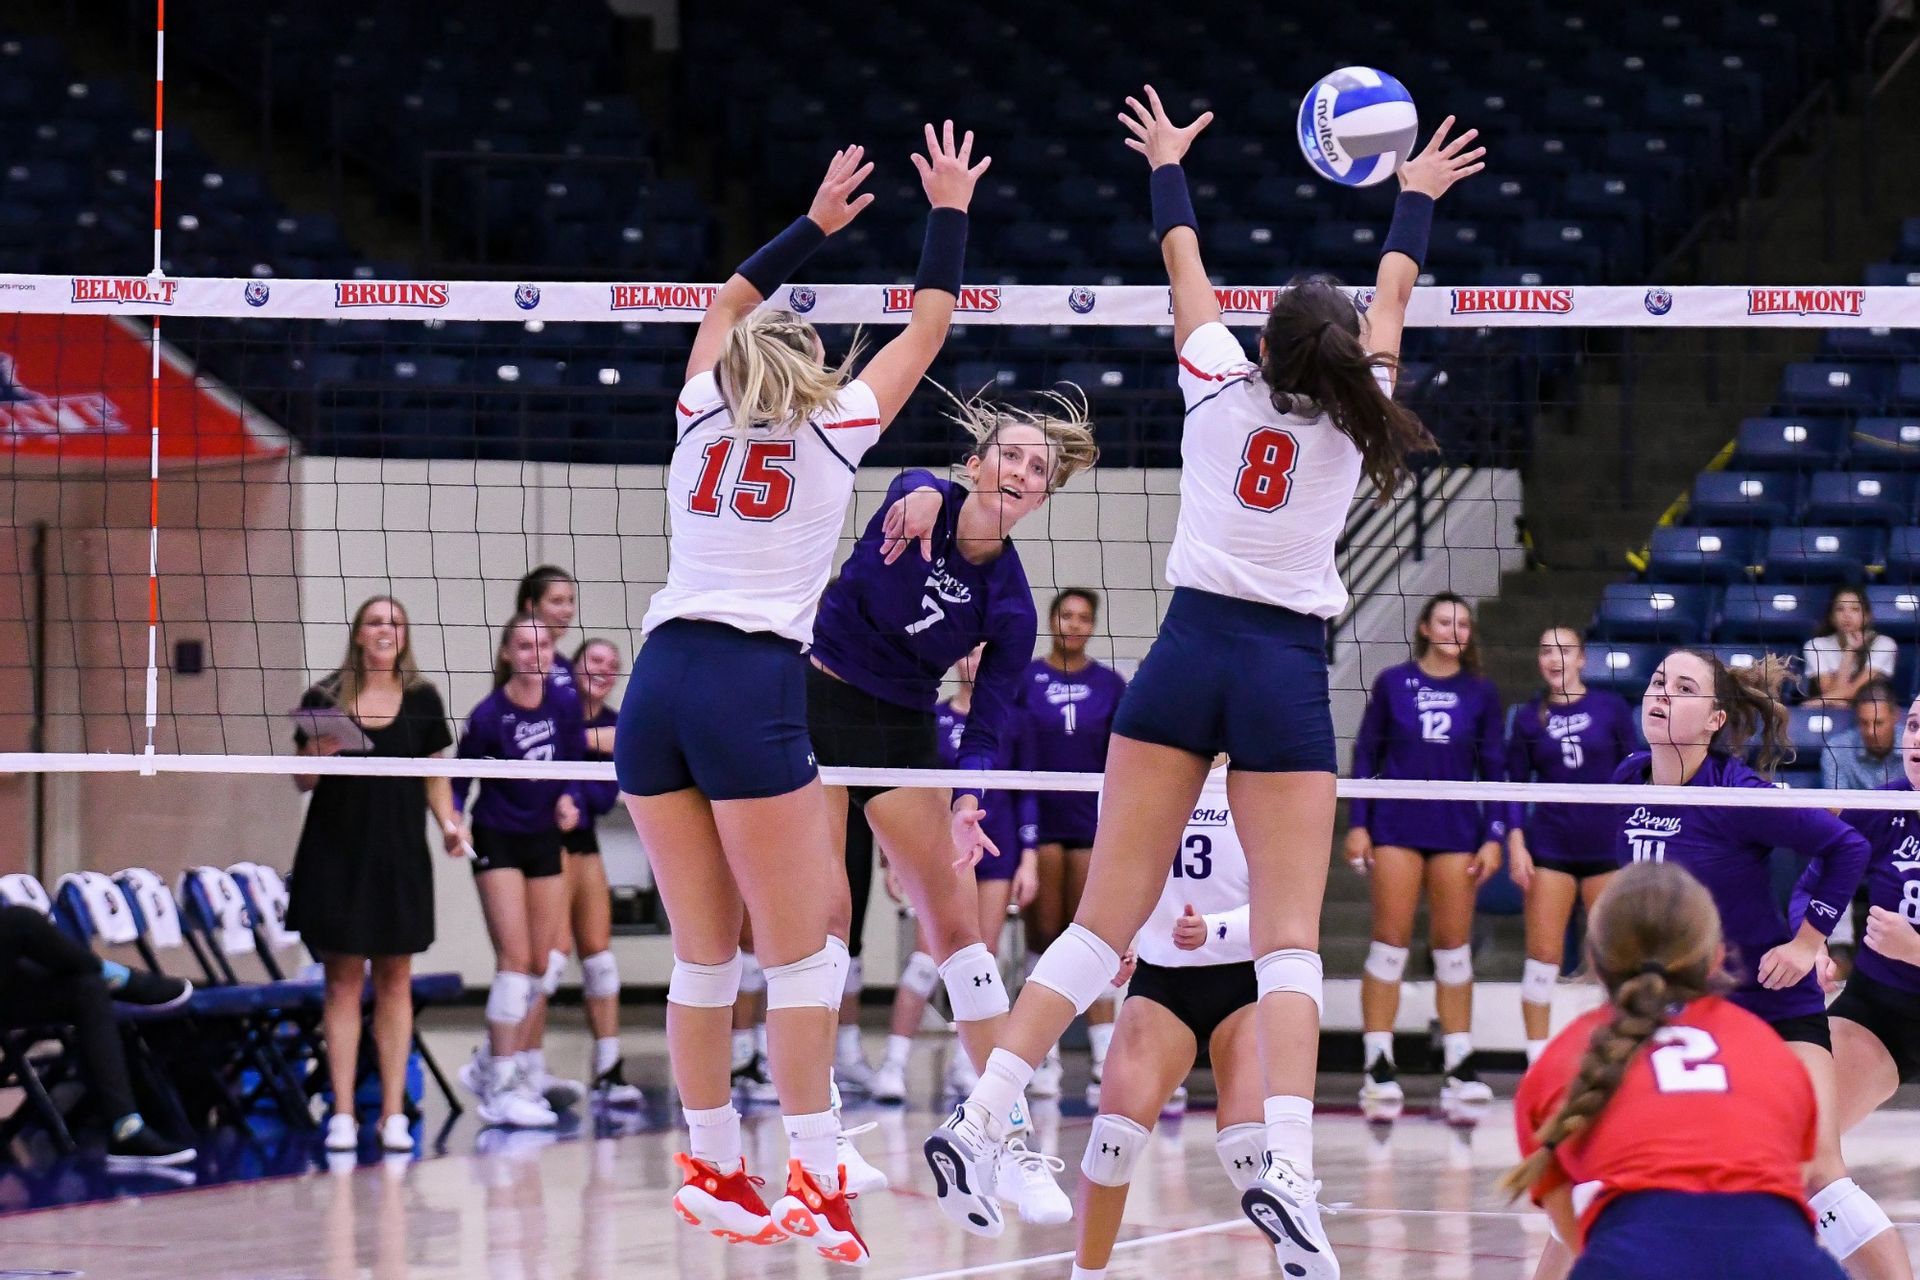 Volleyball prepared for ASUN play after tough schedule - Herd Media